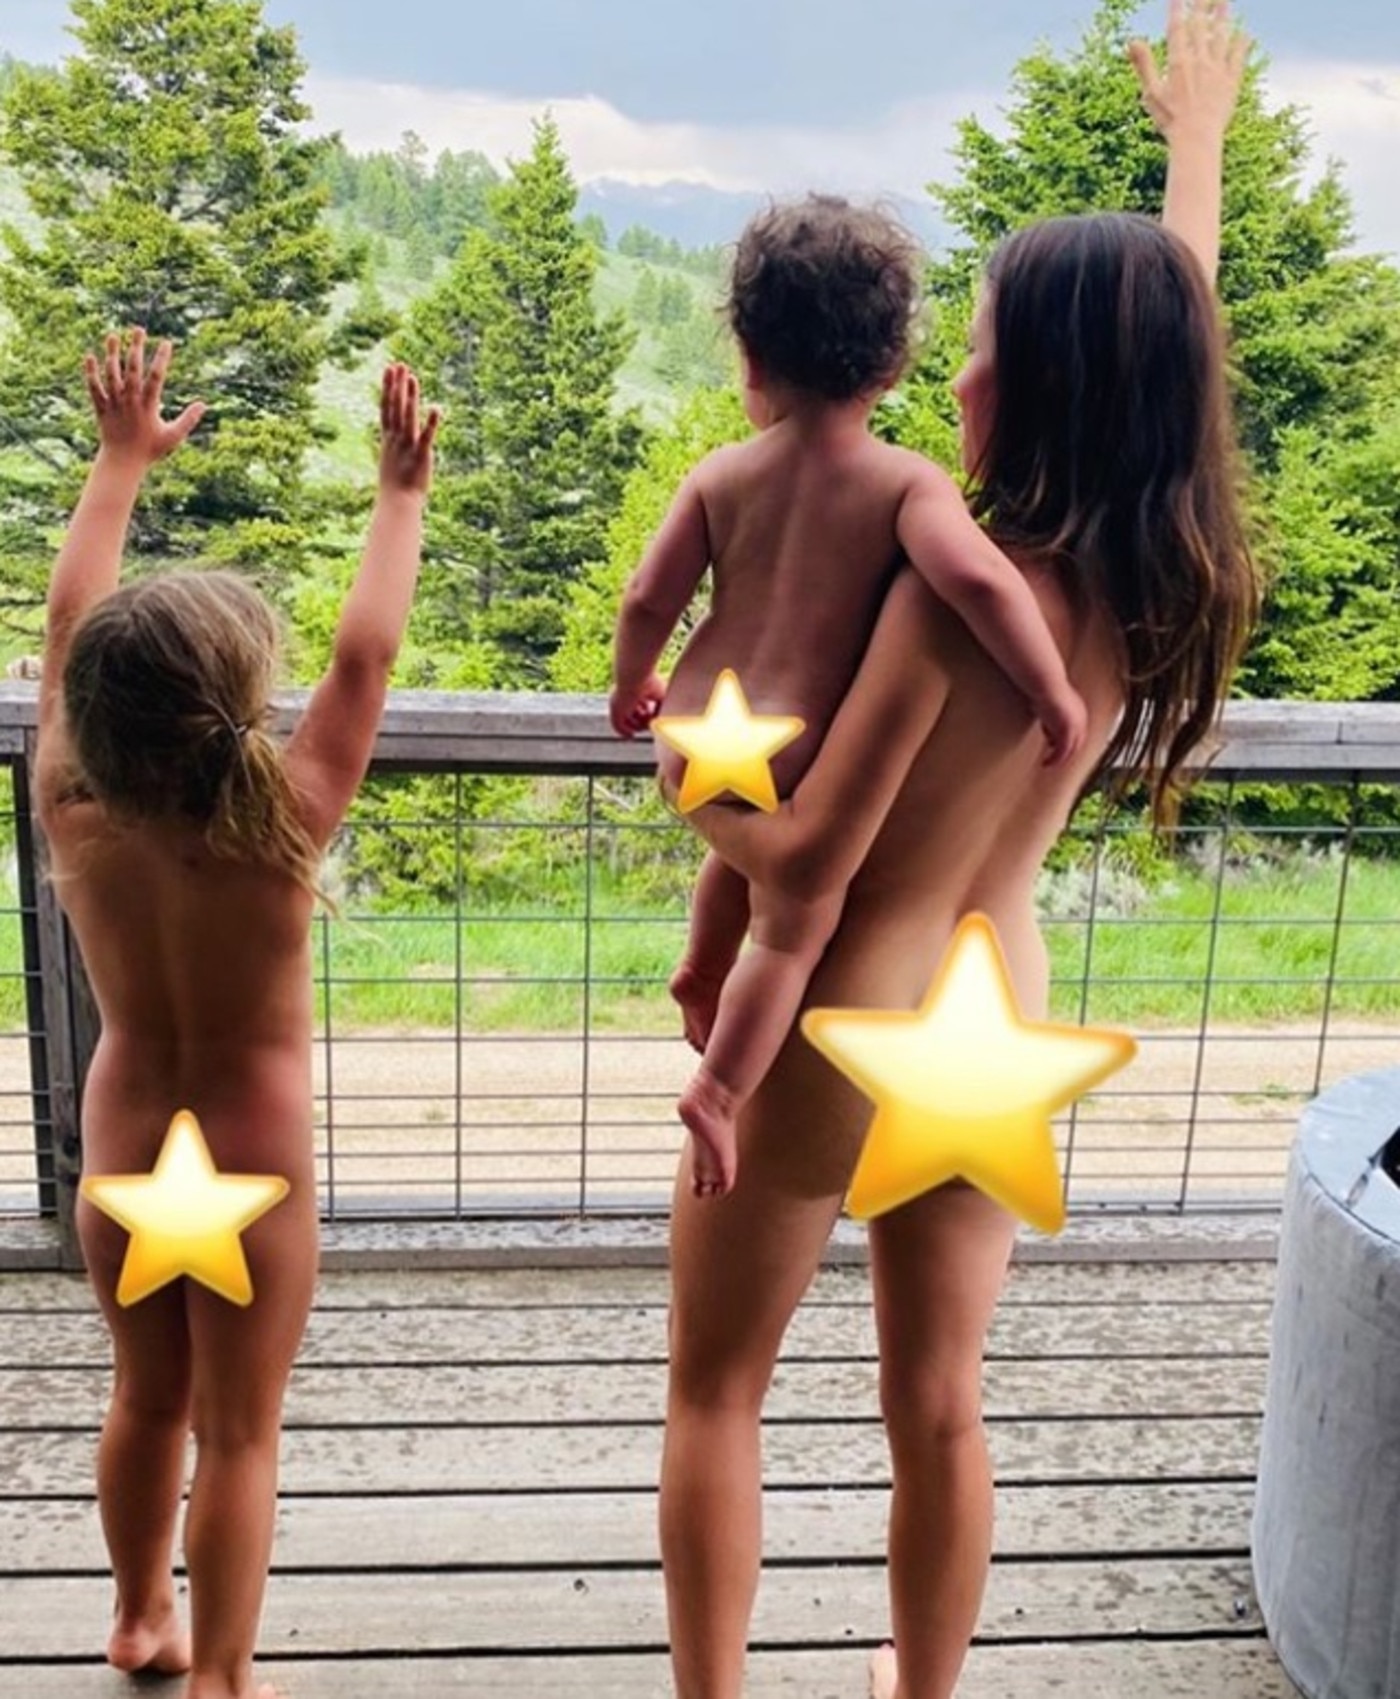 Tammin Sursok, 36, latest Instagram post has divided fans, with some labelling the cheeky nude photo ‘beautiful’, while others brand it ‘strange’. Picture: Instagram/TamminSursok